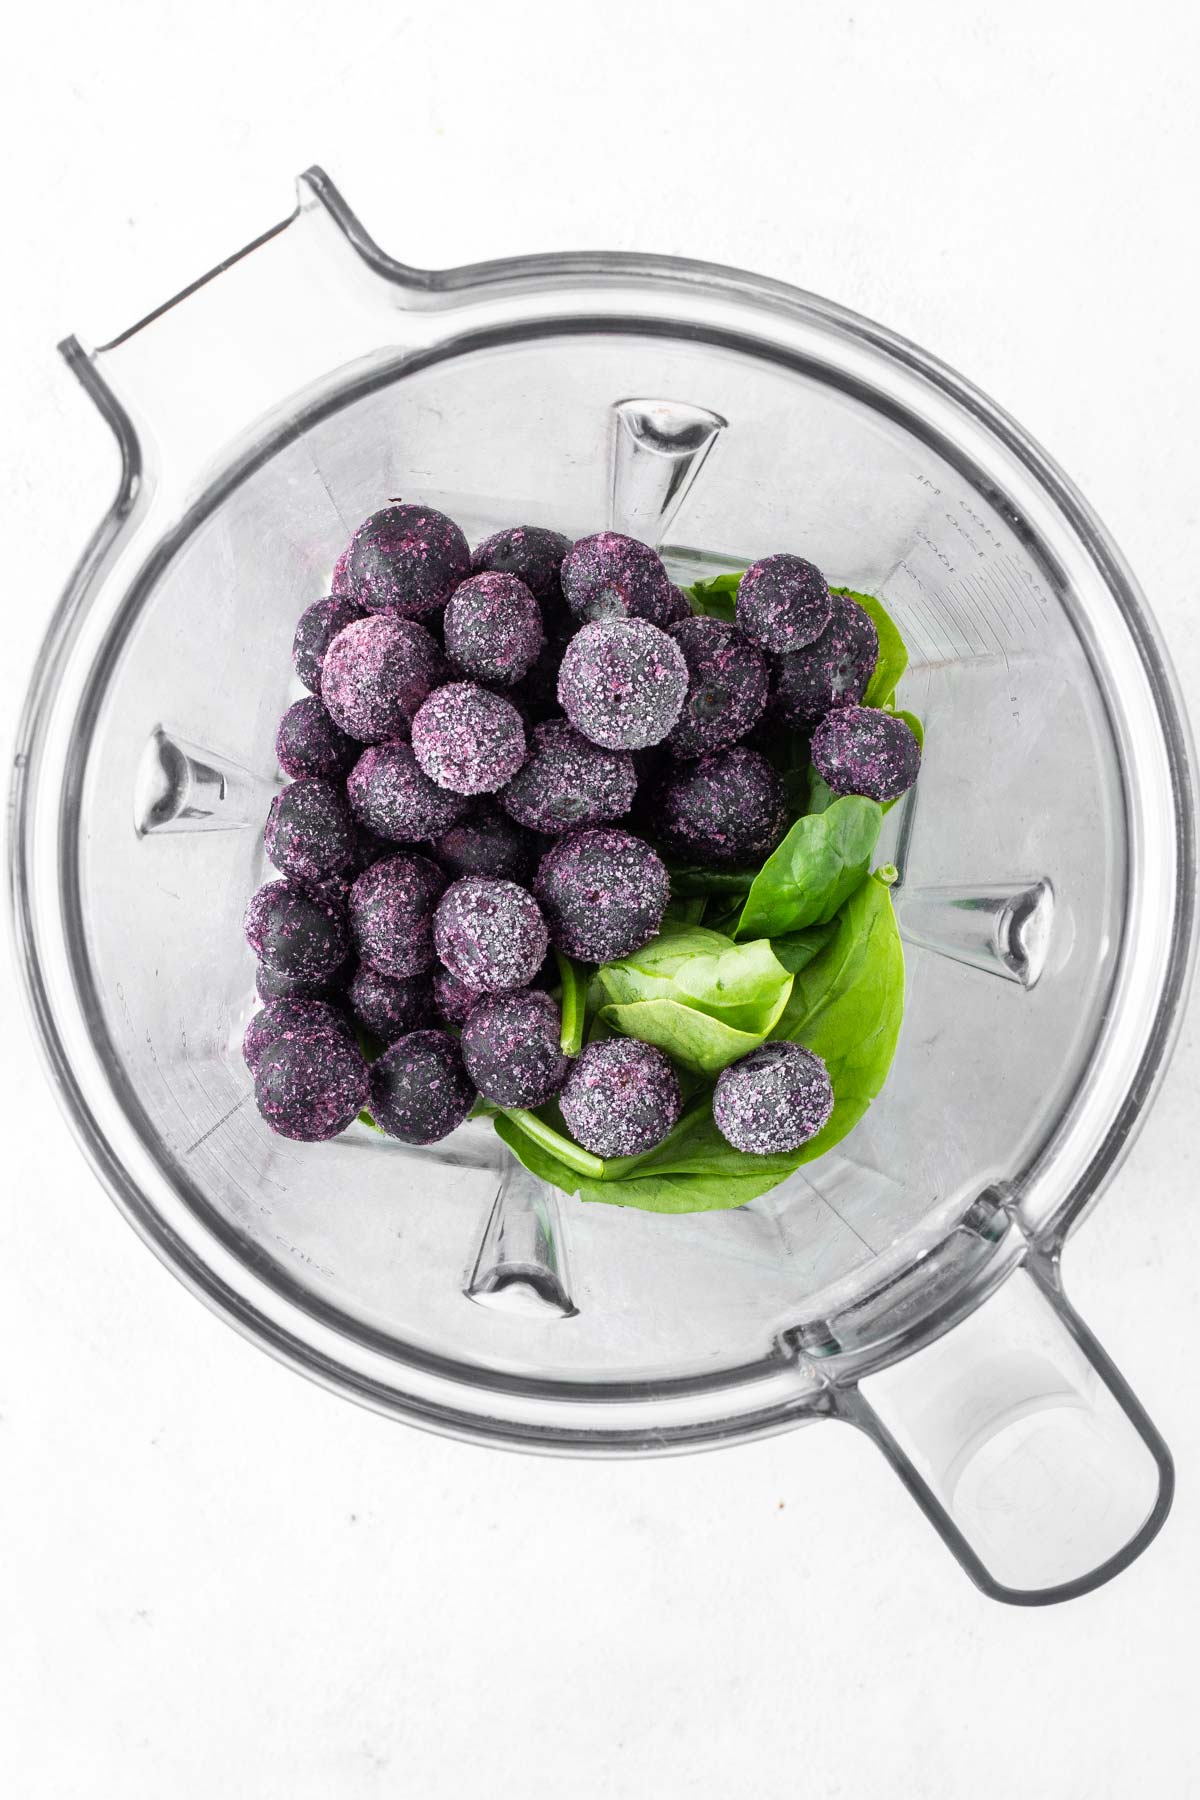 Ingredients for a blueberry smoothie in a blender.